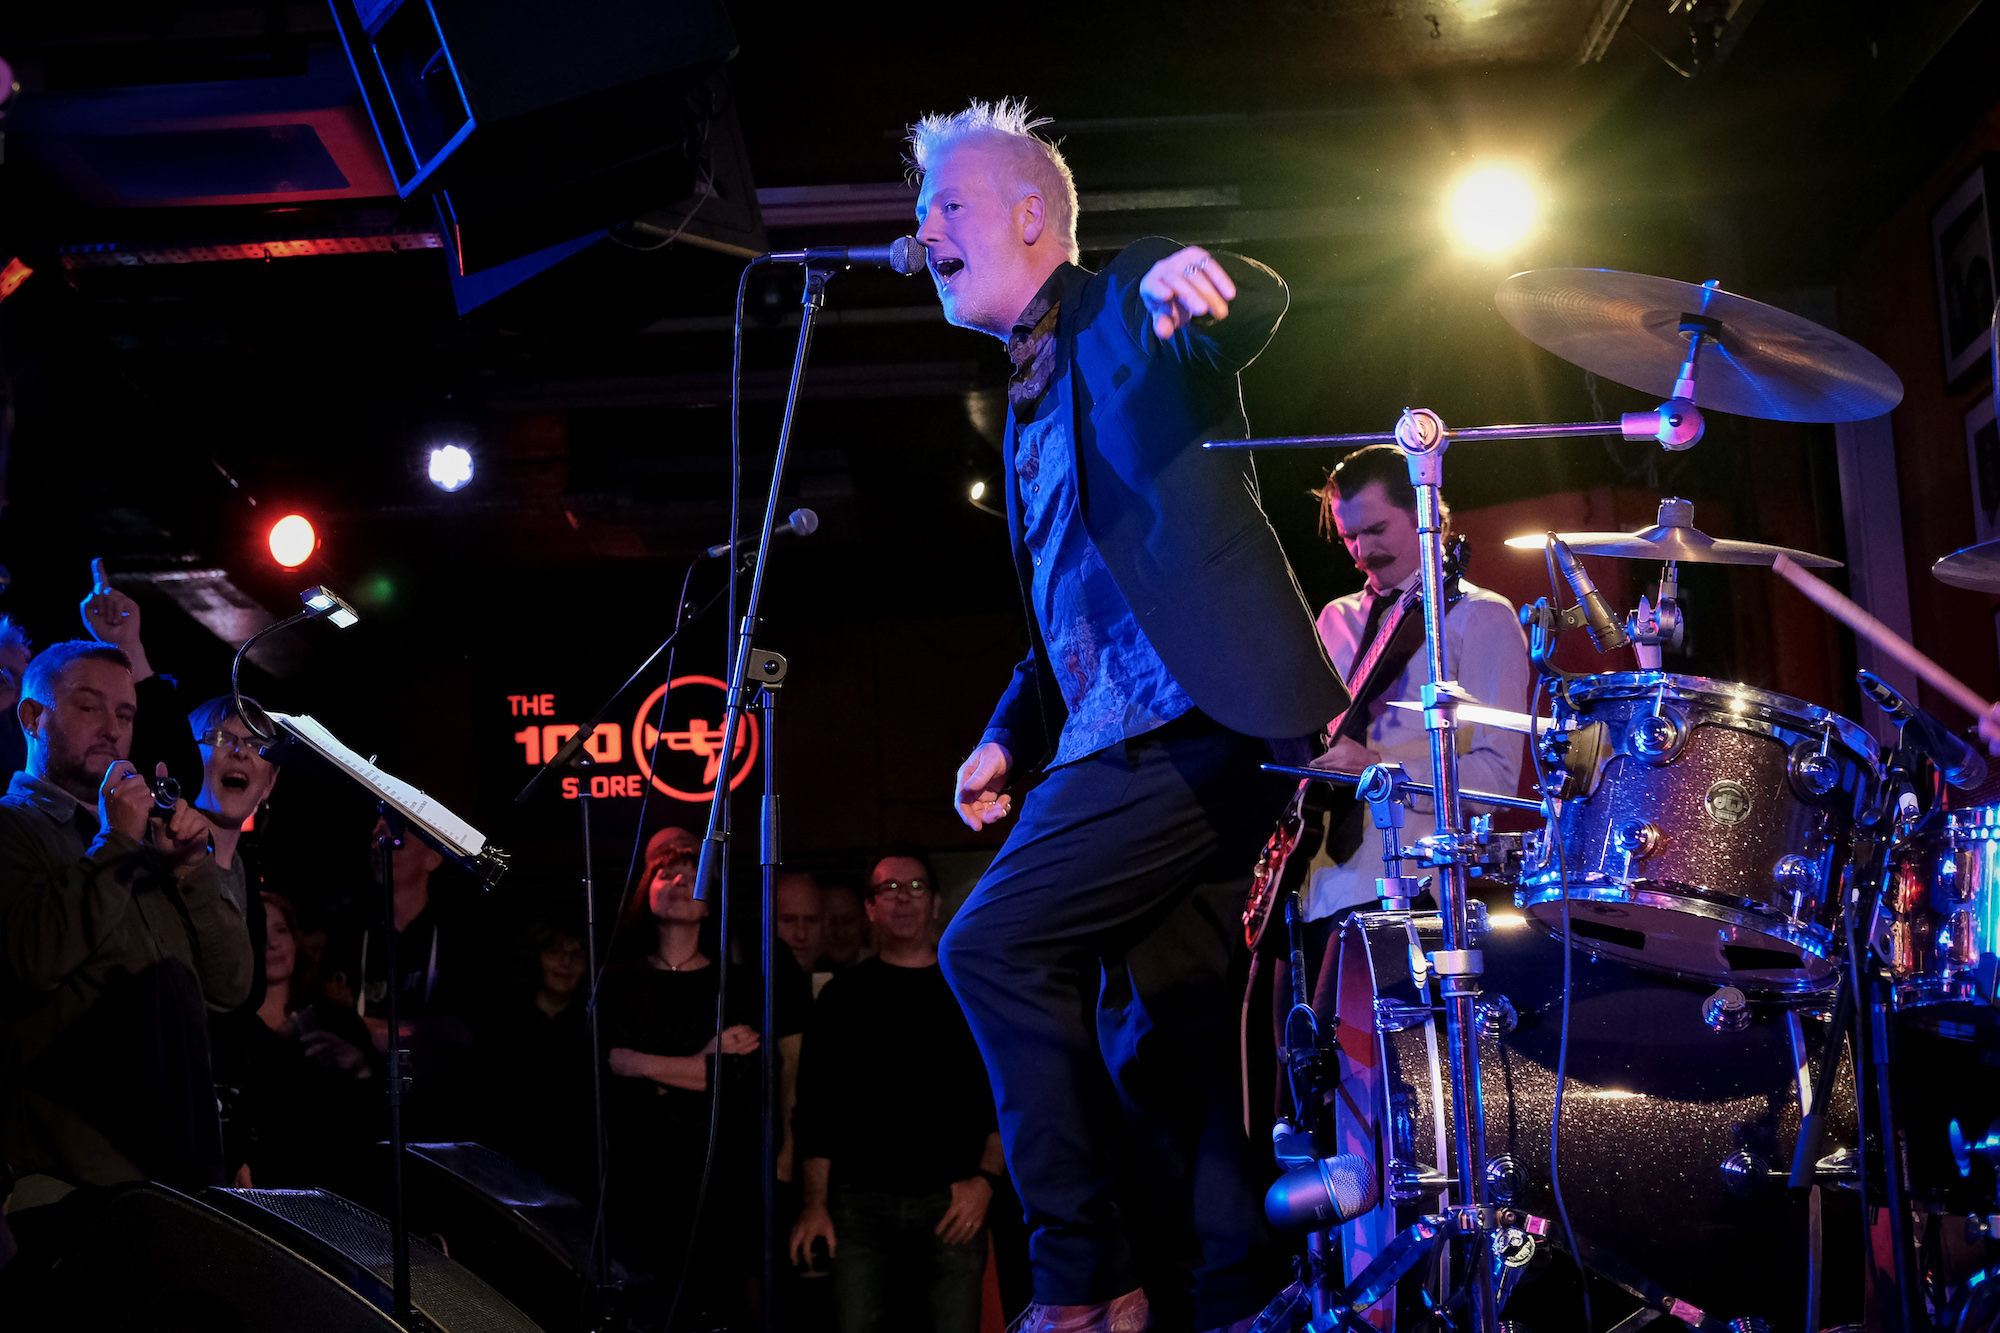 Stephen Jones Babybird live at the 100 Club November 2019 - picture by Sam Wells